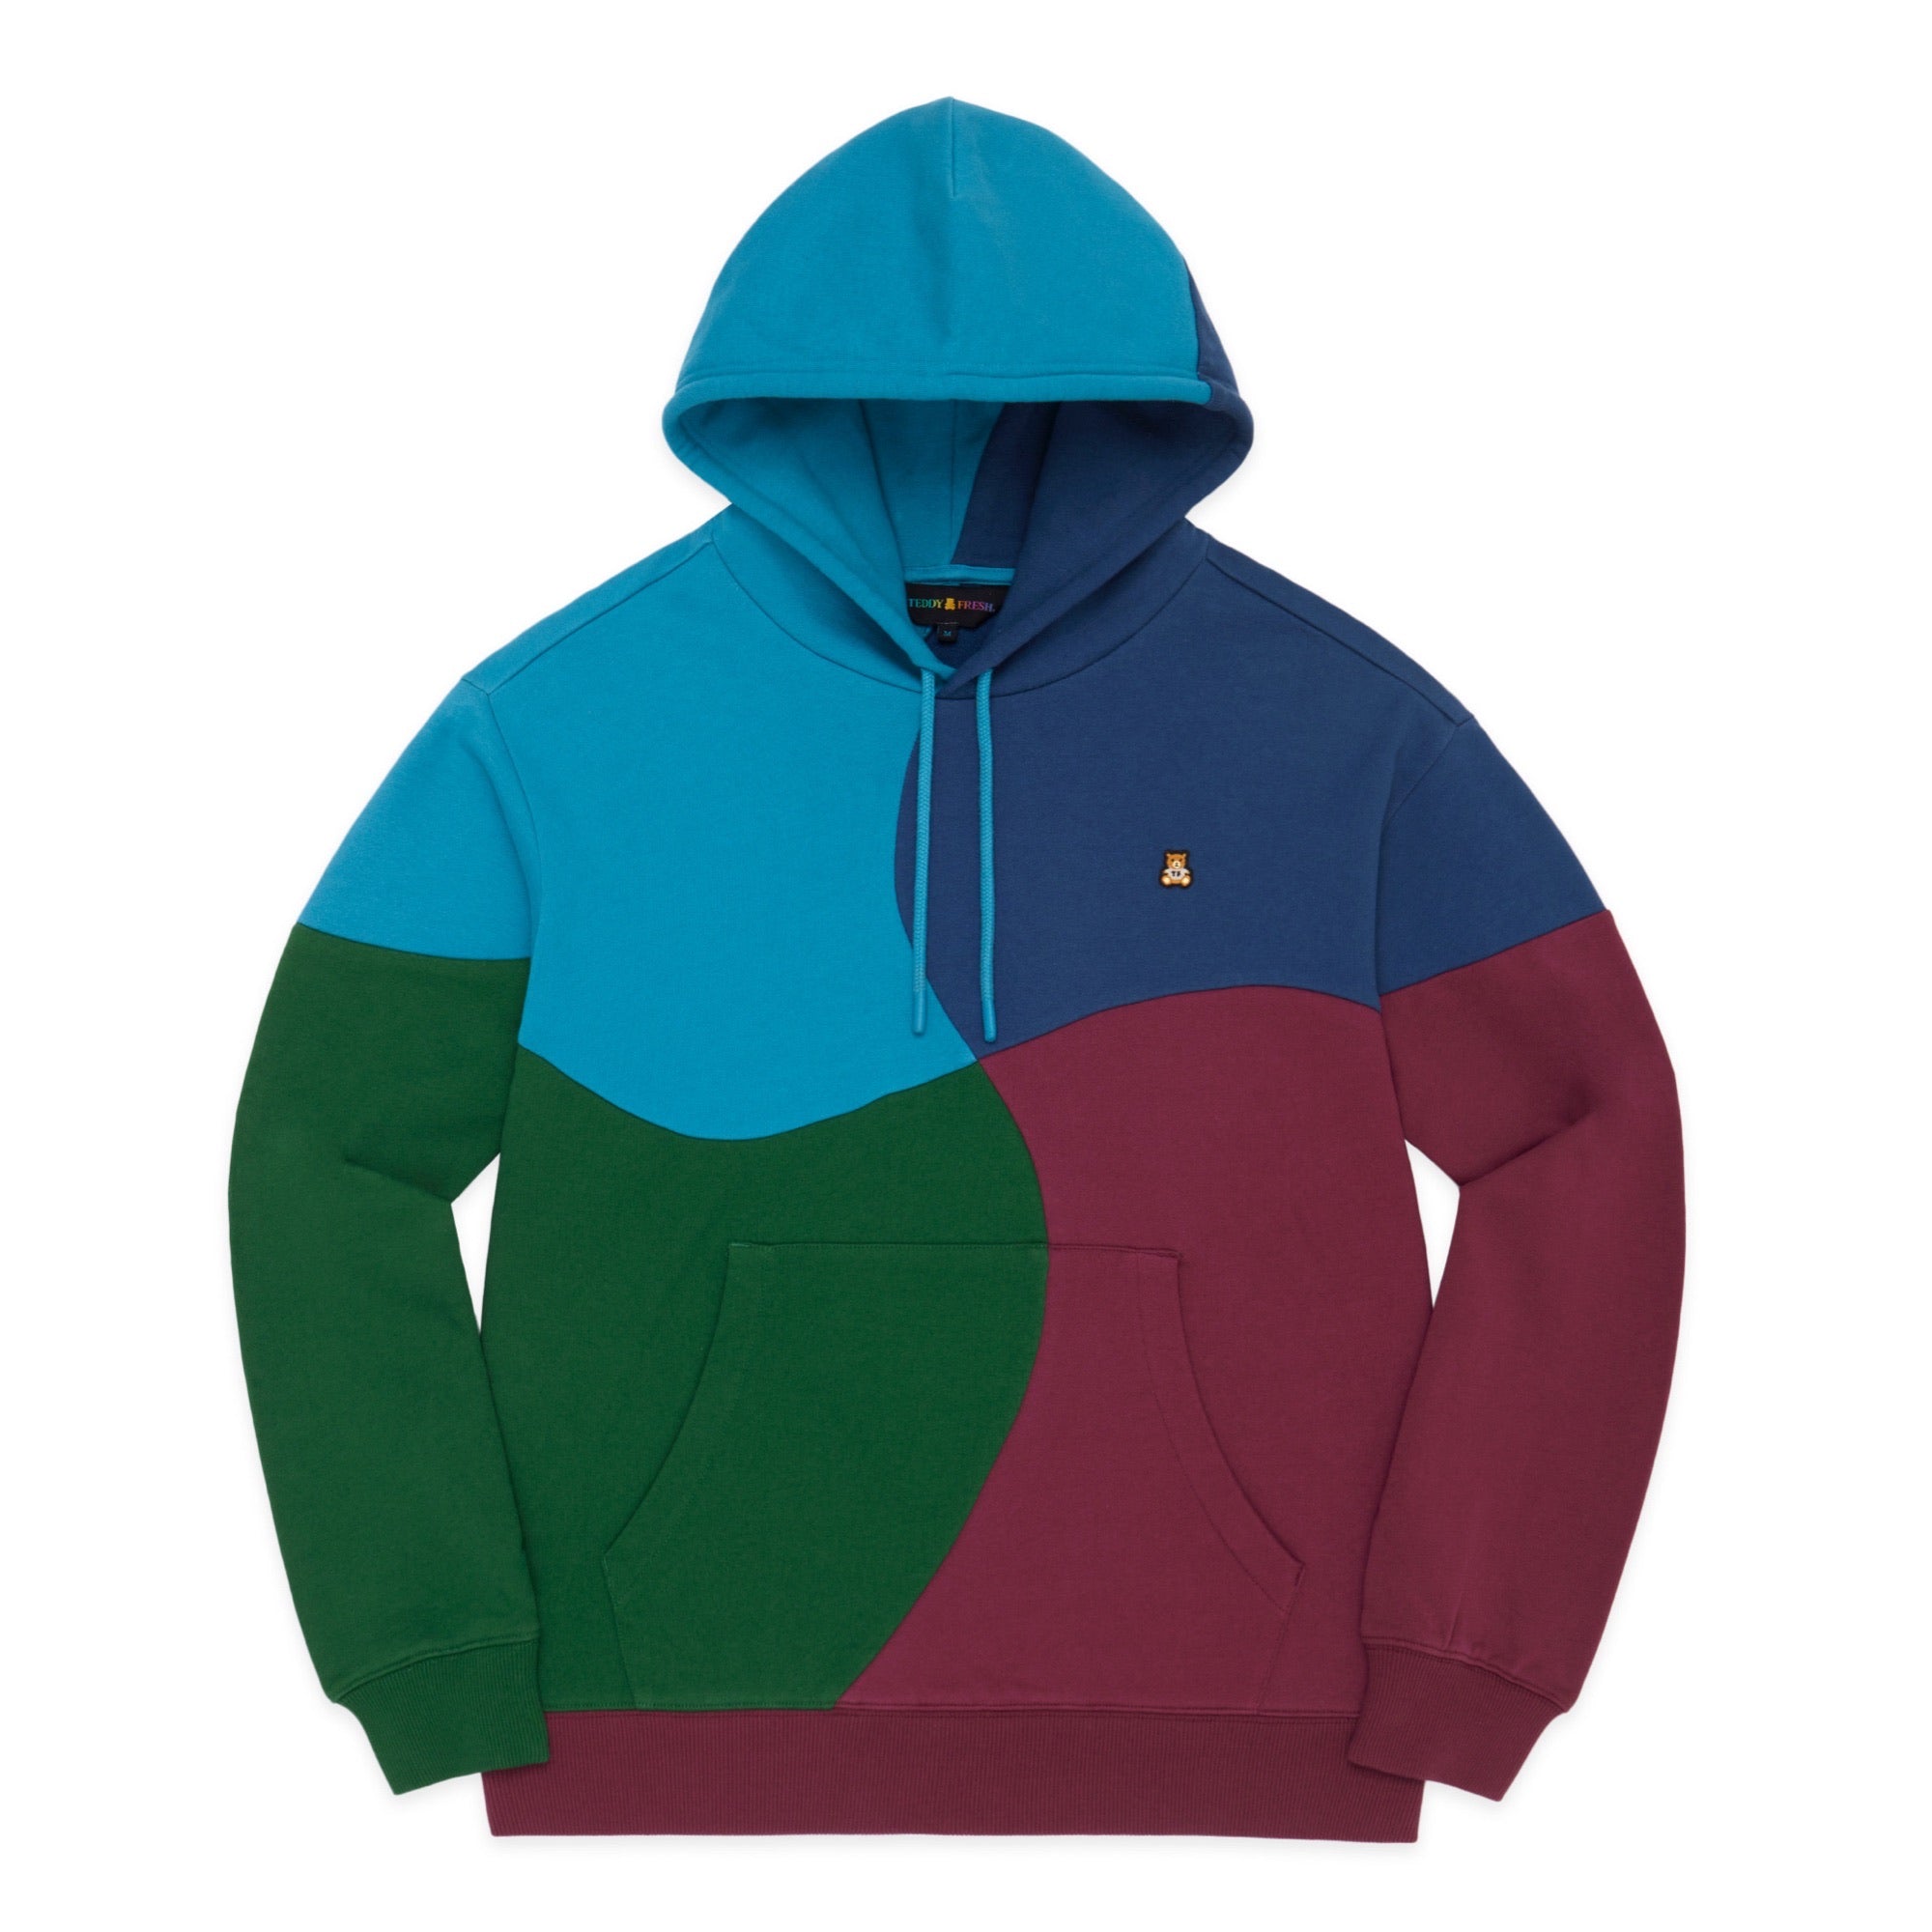 Isn't this a hoodie that Ben has (the Teddy Fresh one). Would be